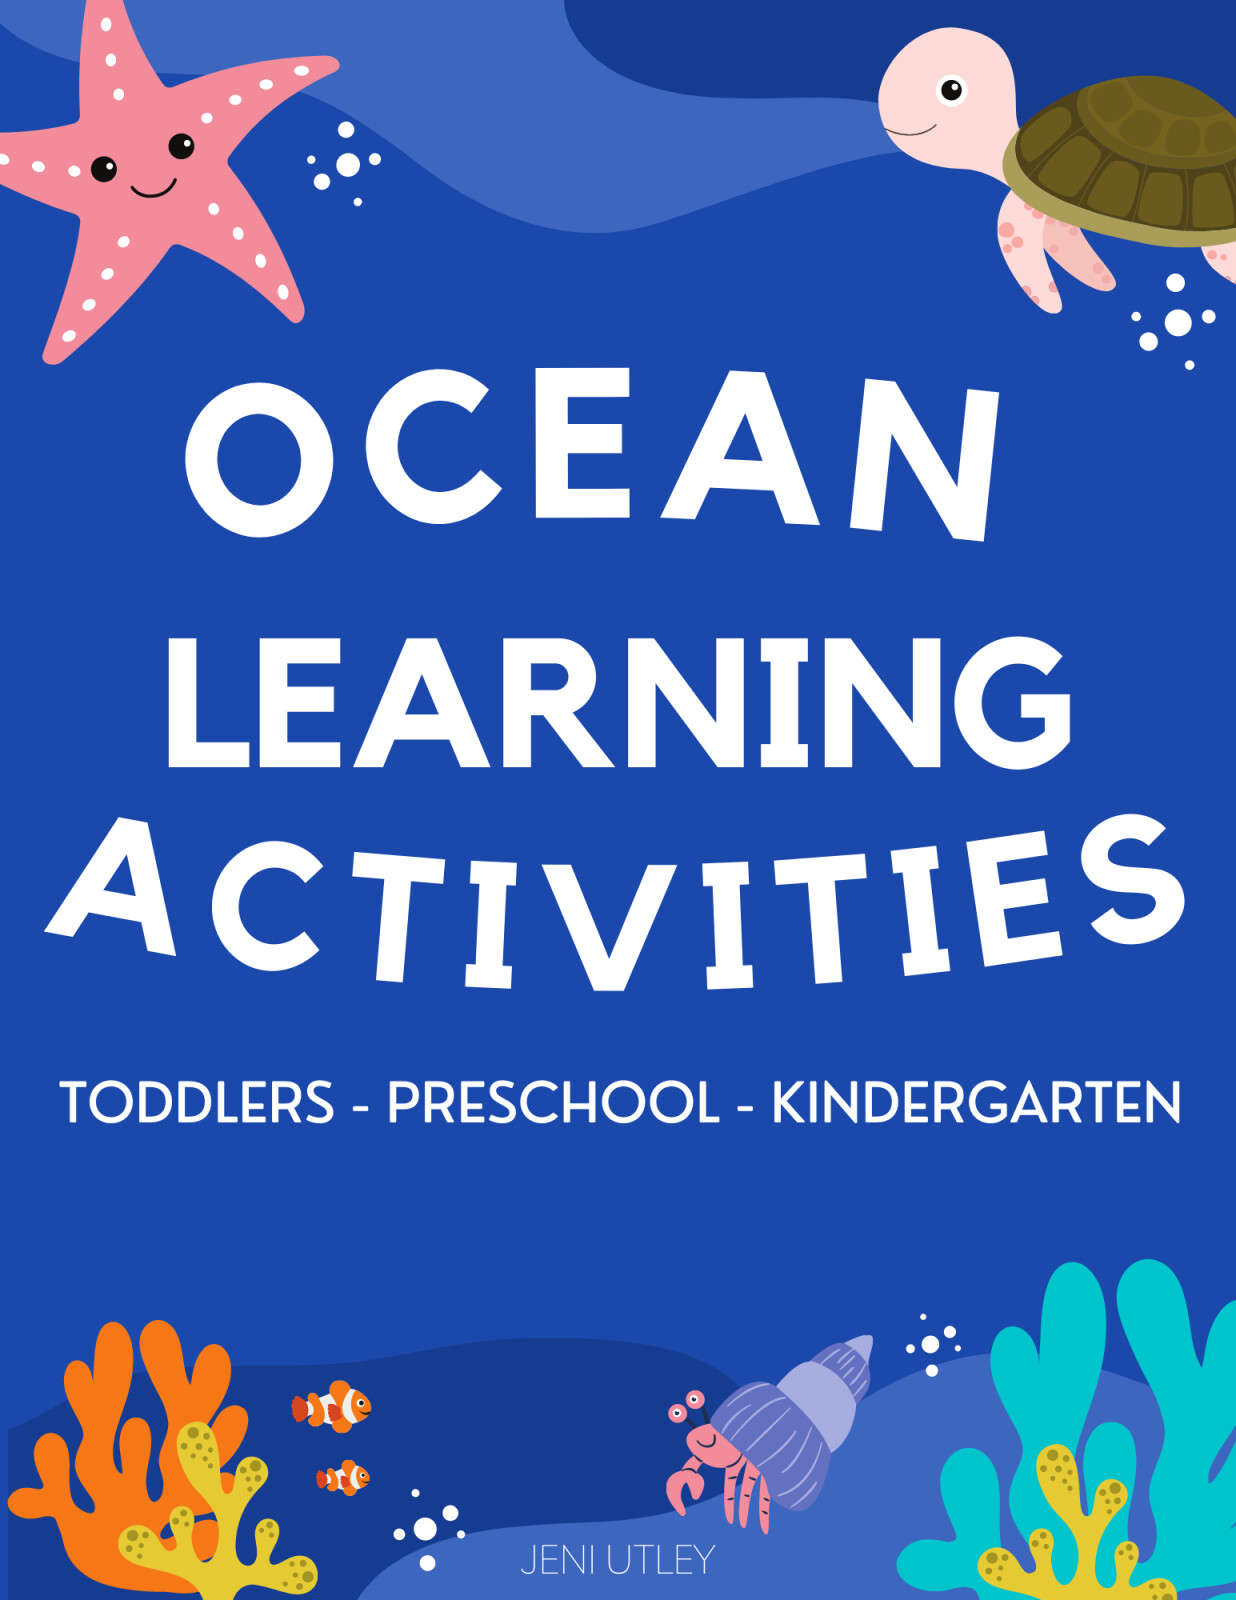 Ocean-Themed Learning Activities